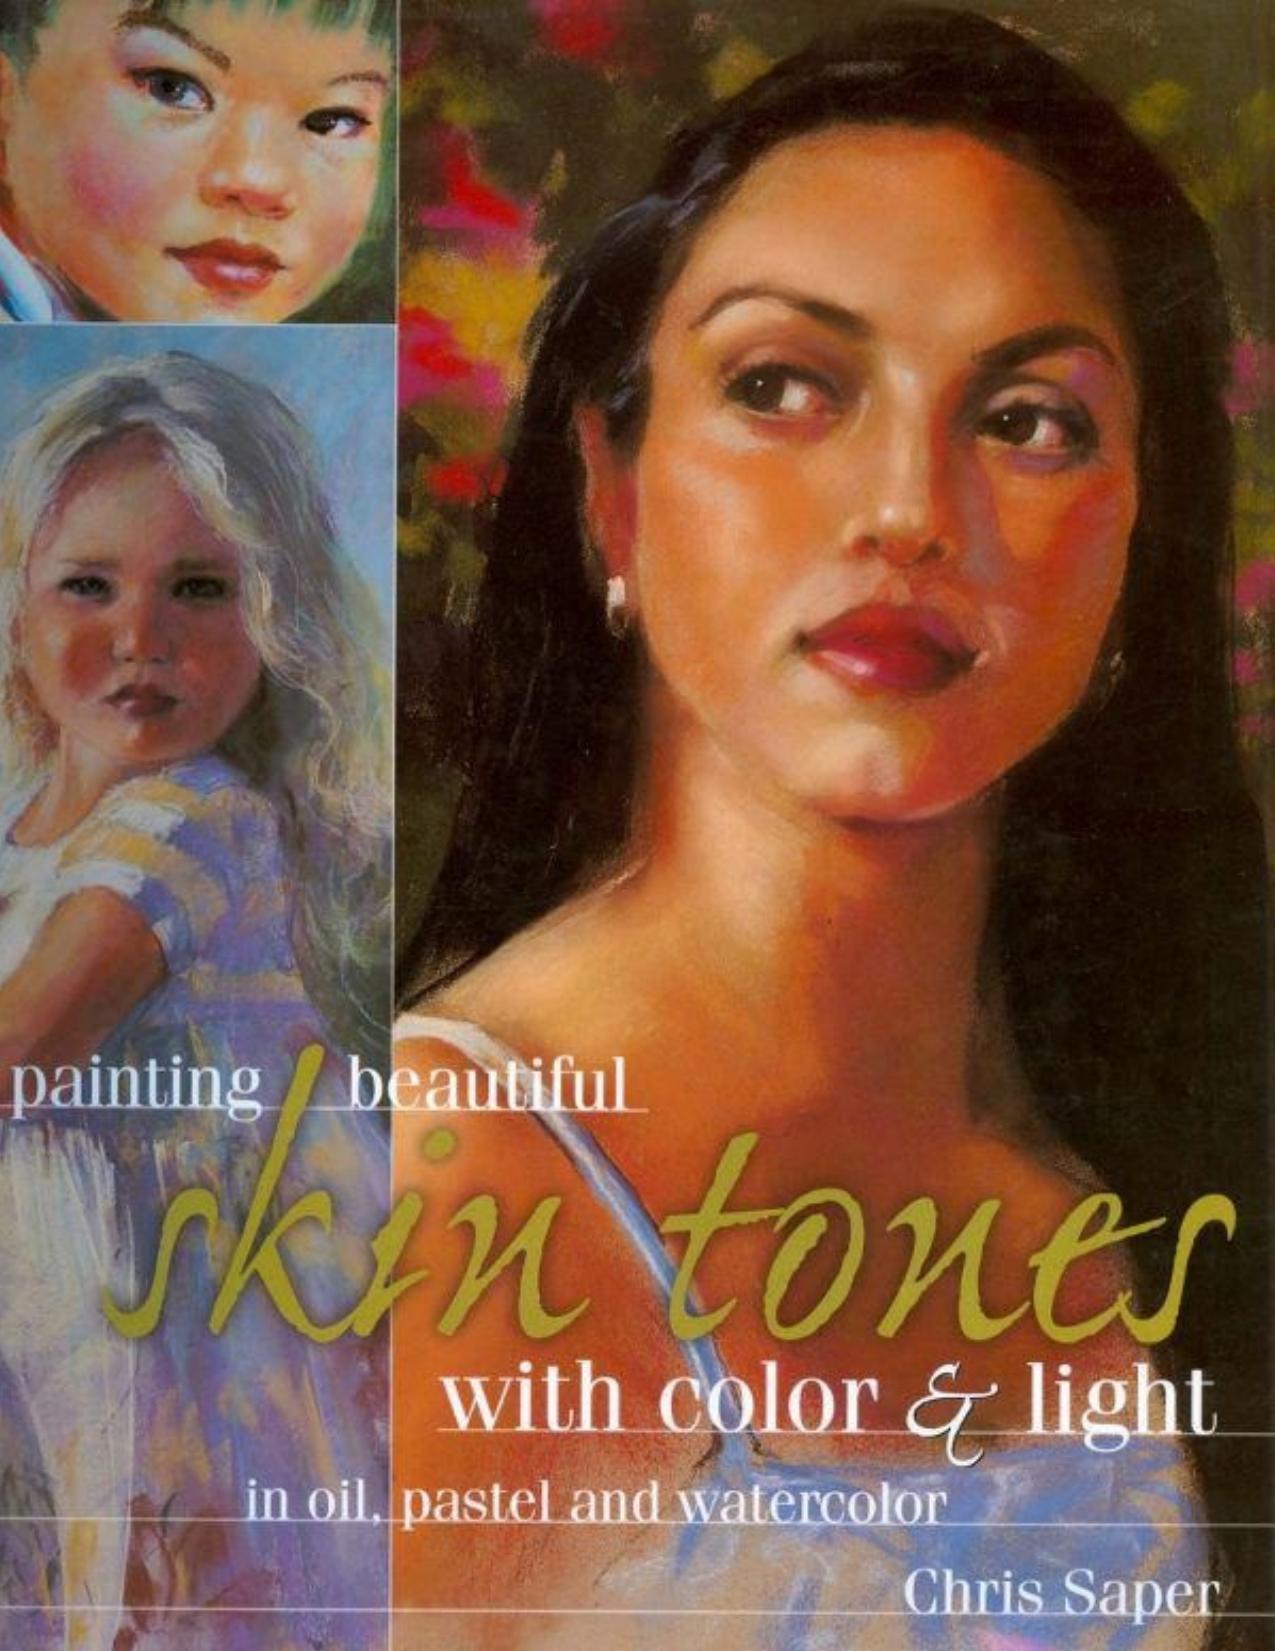 Painting beautiful skin tones with color \& light : oil, pastel and watercolor - PDFDrive.com